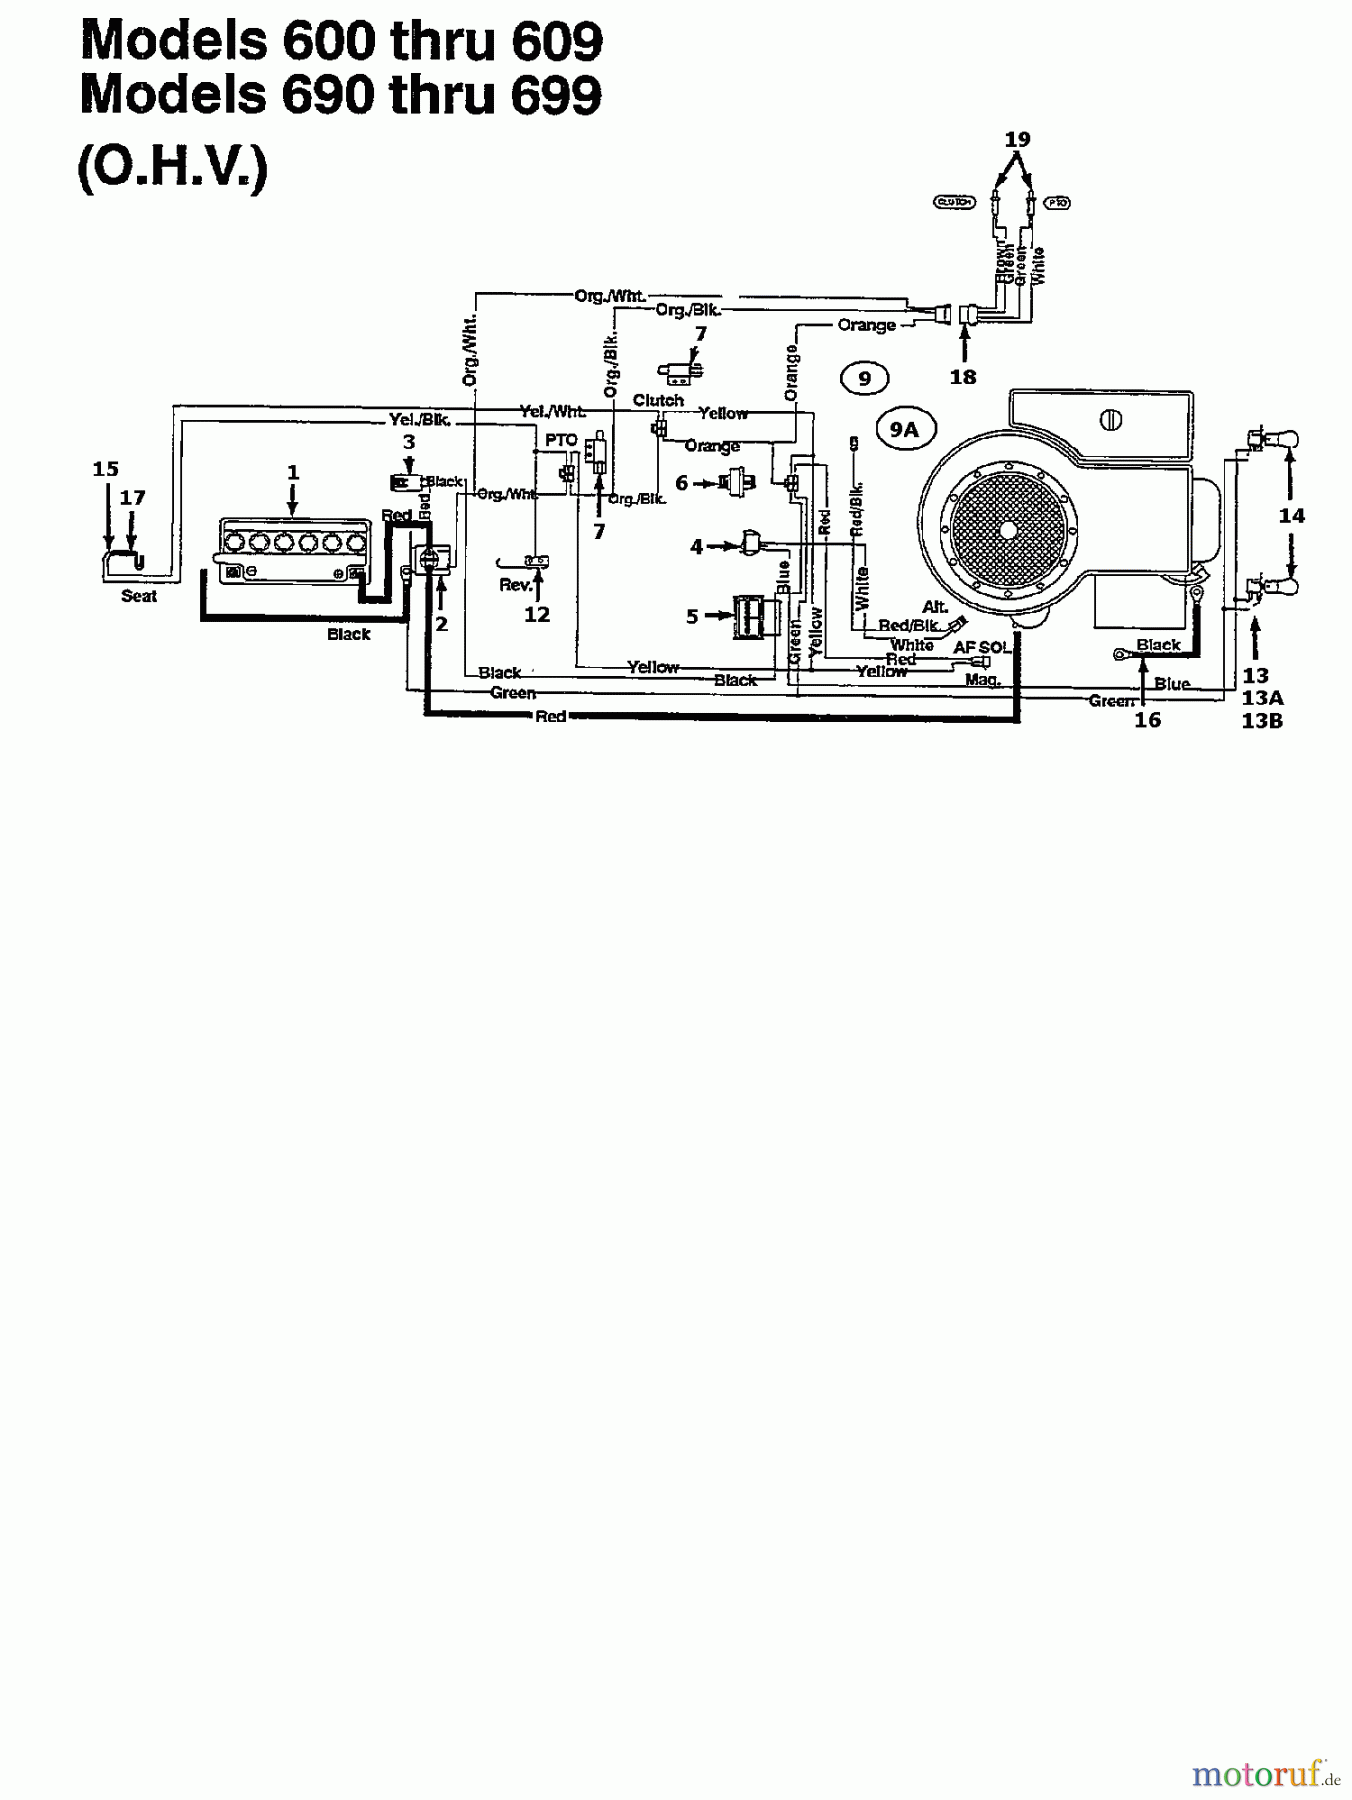  MTD Lawn tractors H 165 135T695G678  (1995) Wiring diagram for O.H.V.